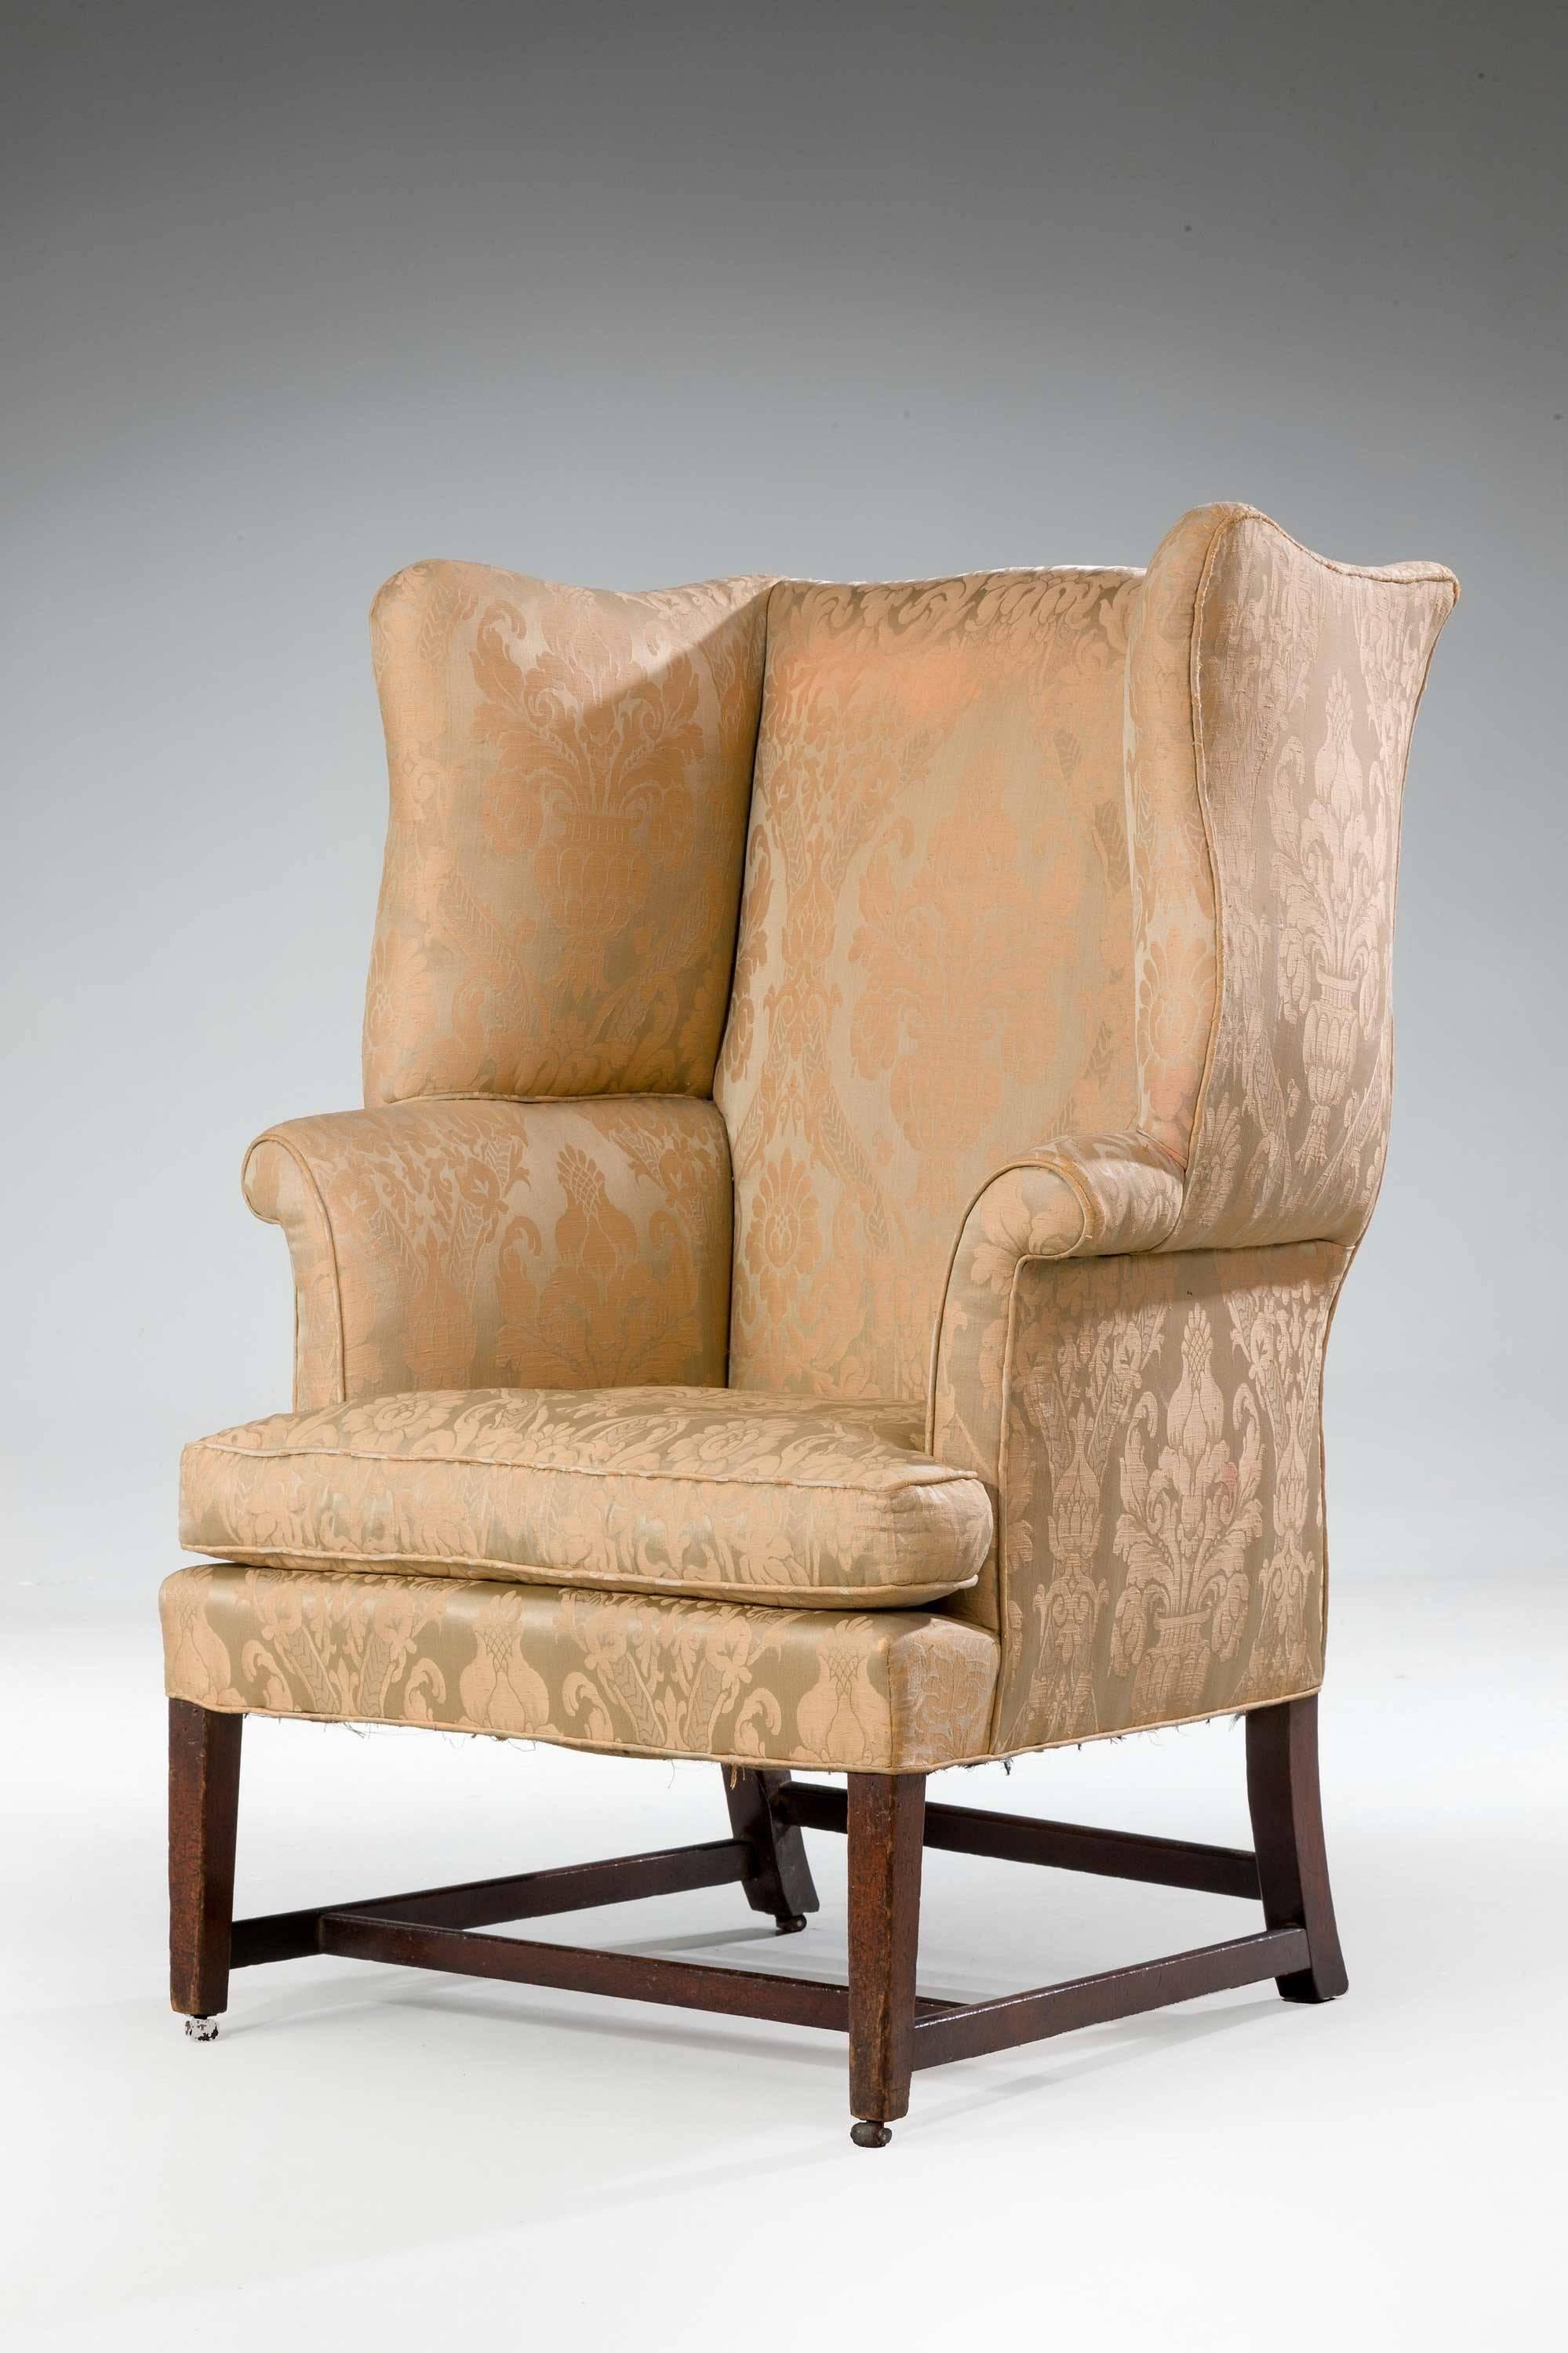 18th Century George III Period Wing Chair with Serpentine Wings